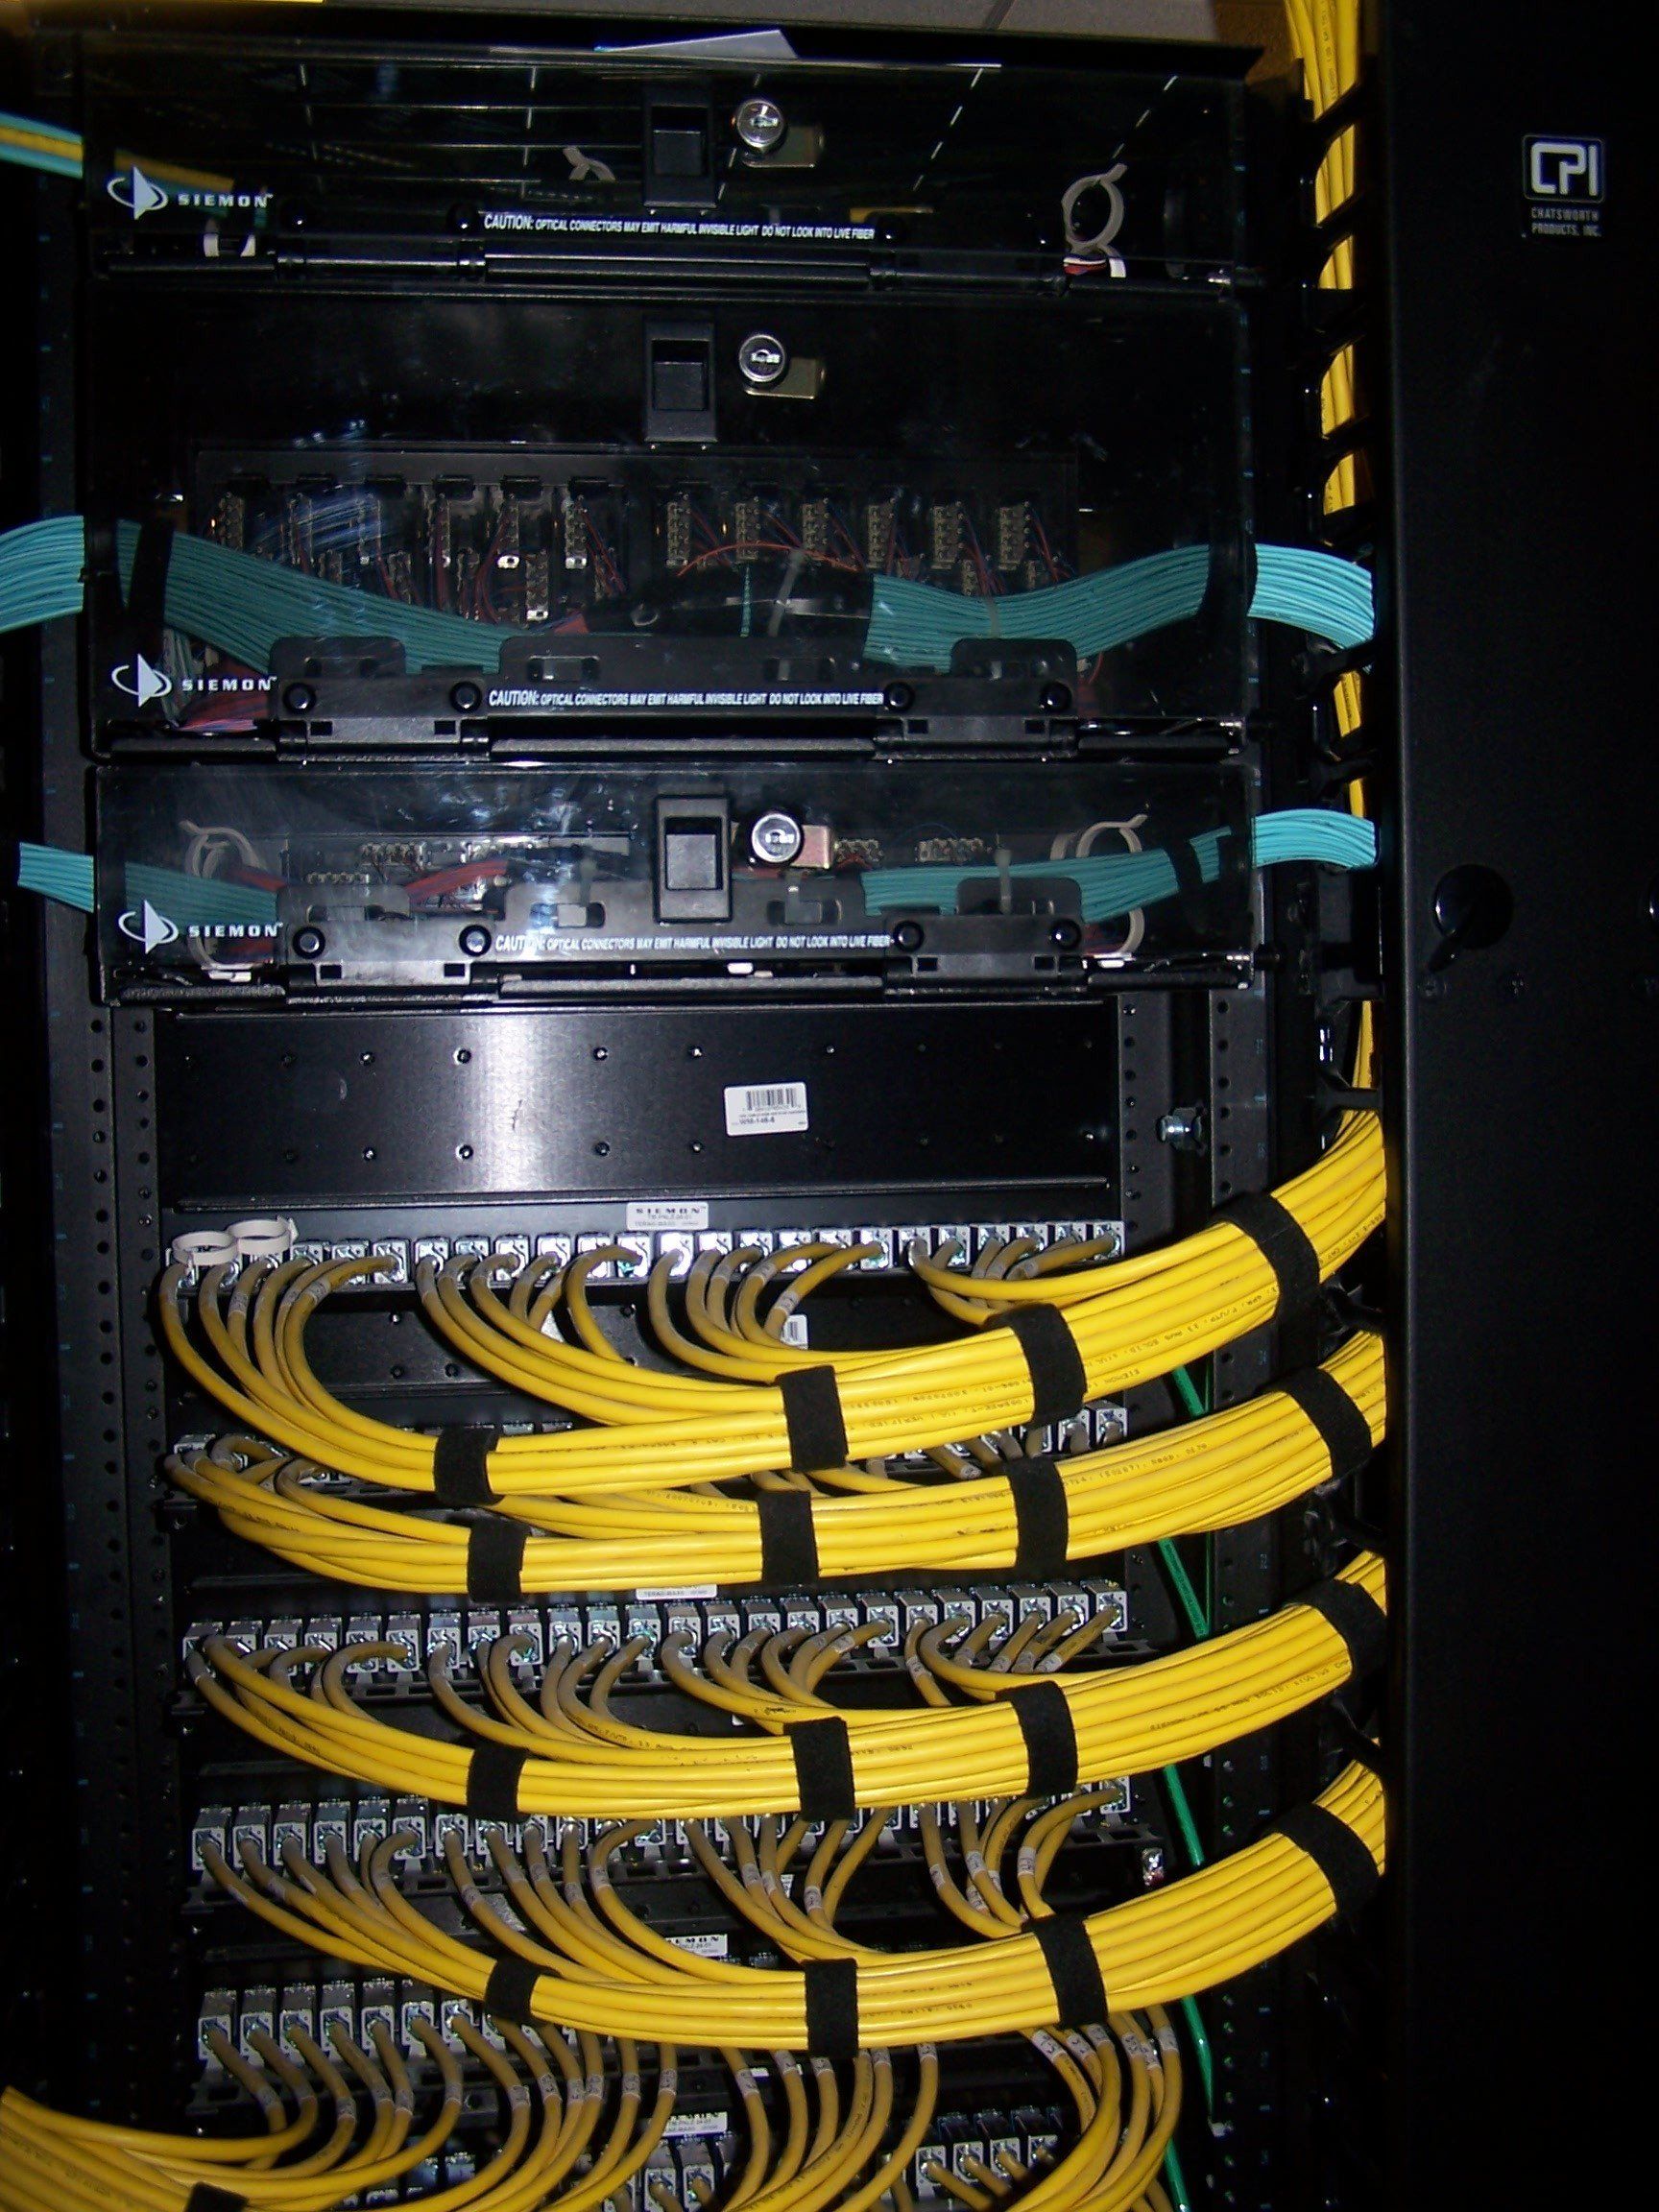 Structured cabling system